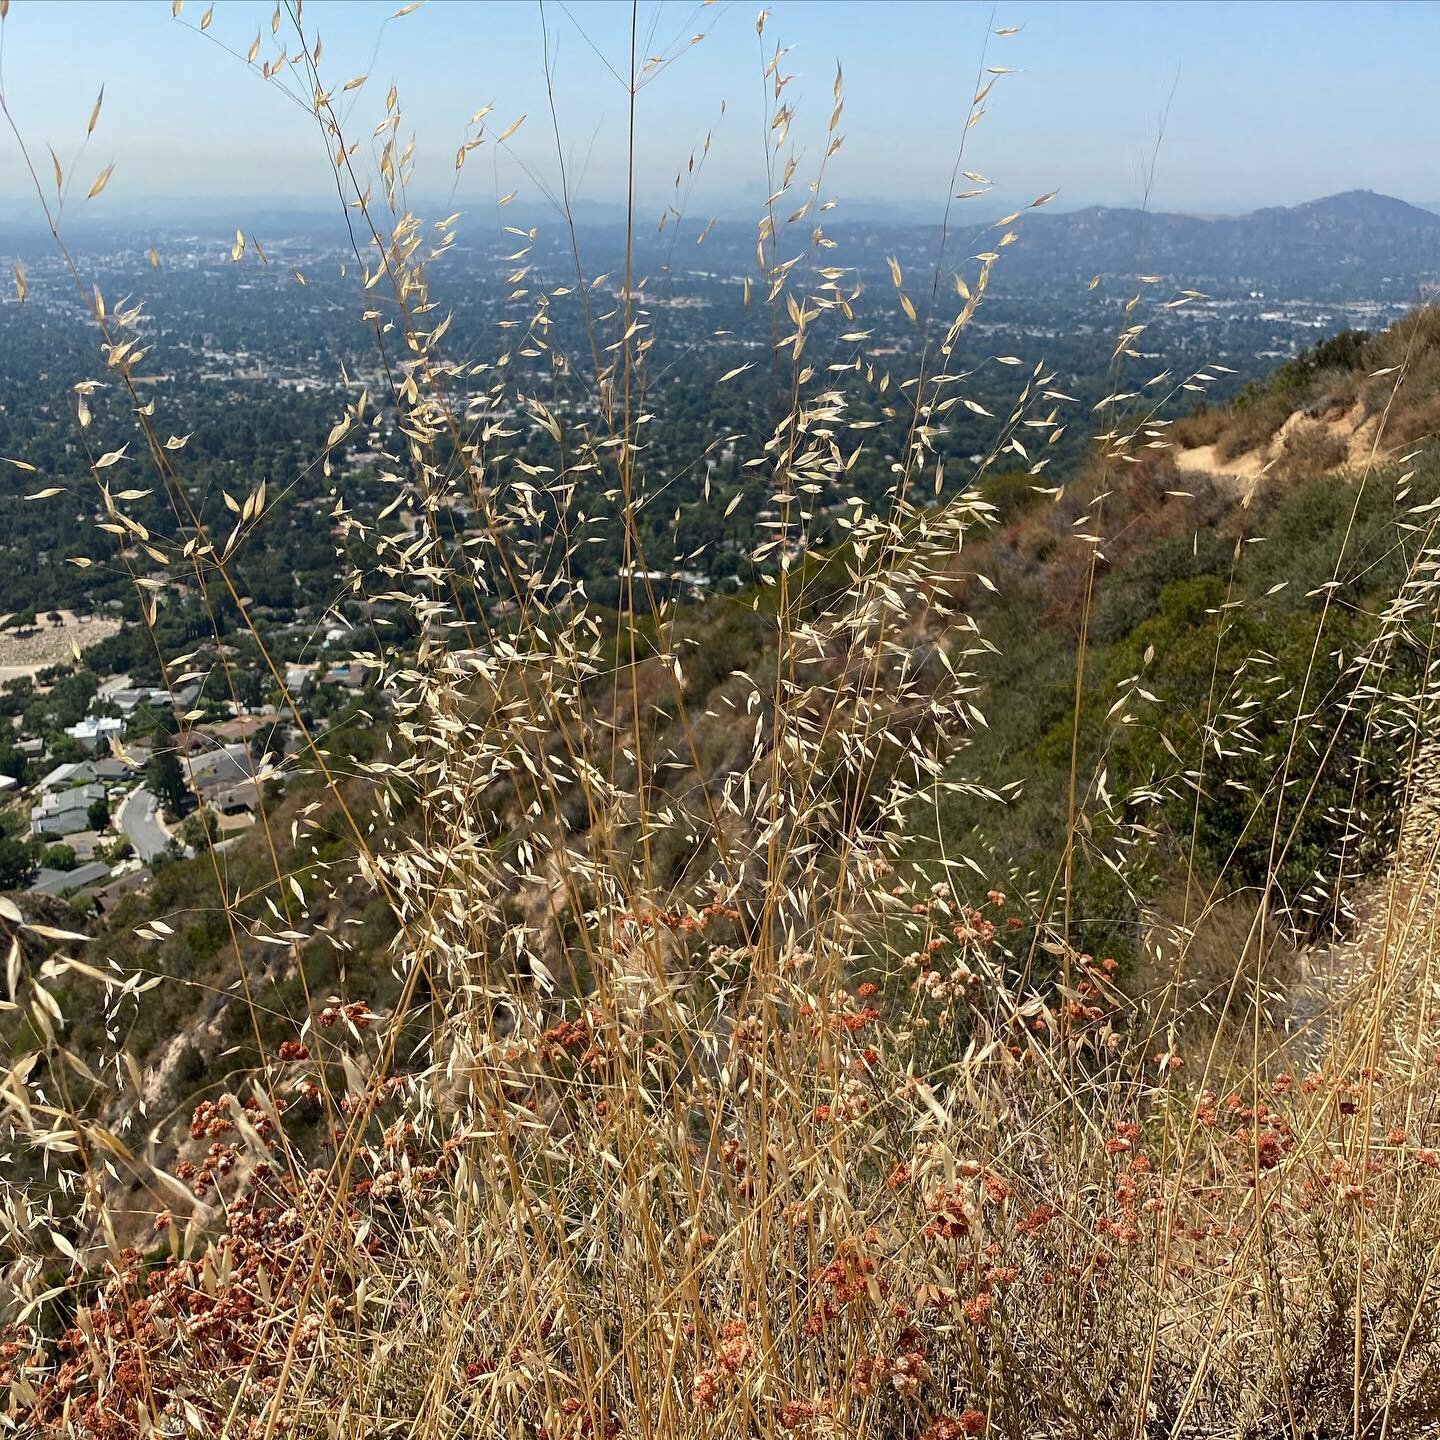 Slender Wild Oats 

Sit on this cliff with me for a few minutes. 

#pause #pauseandreflect #asmr #soundartists #soundhealing #soundbath #fieldrecordings #acousticecology #oatmeal #sangabrielmountains #hiking #losangeles